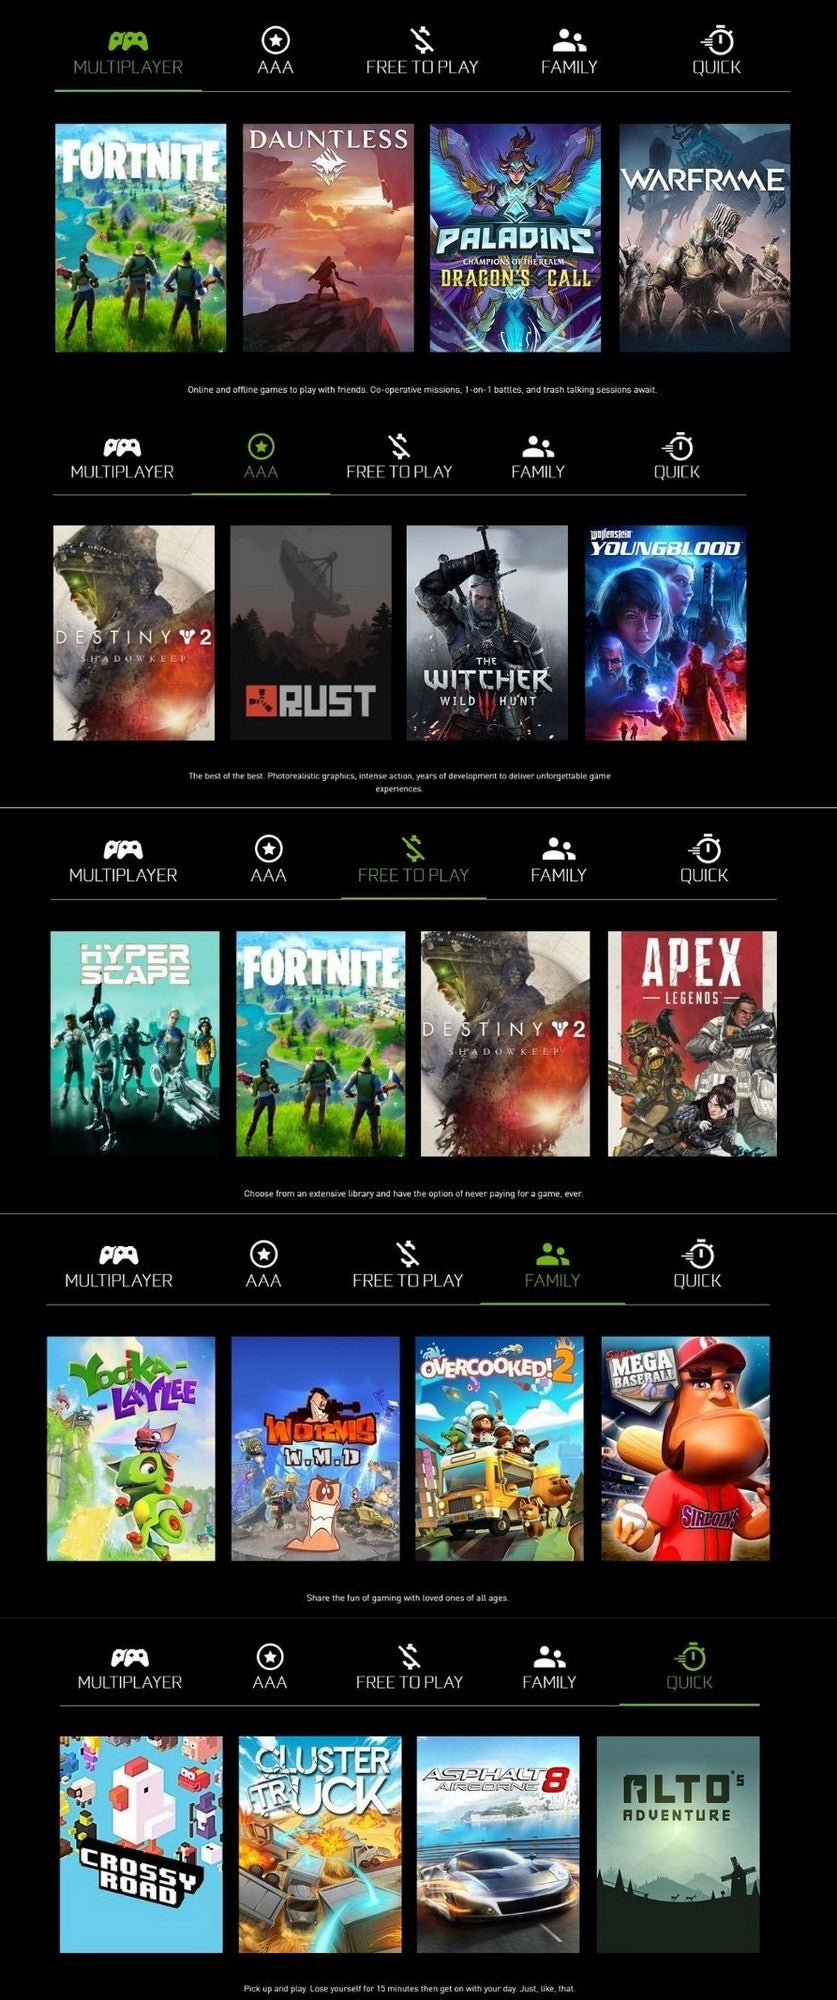 Nvidia shield android tv 4K HDR Streaming Media Player; High Performance, Dolby Vision, Google Assistant Built -in, Works with Alexa -Gaming